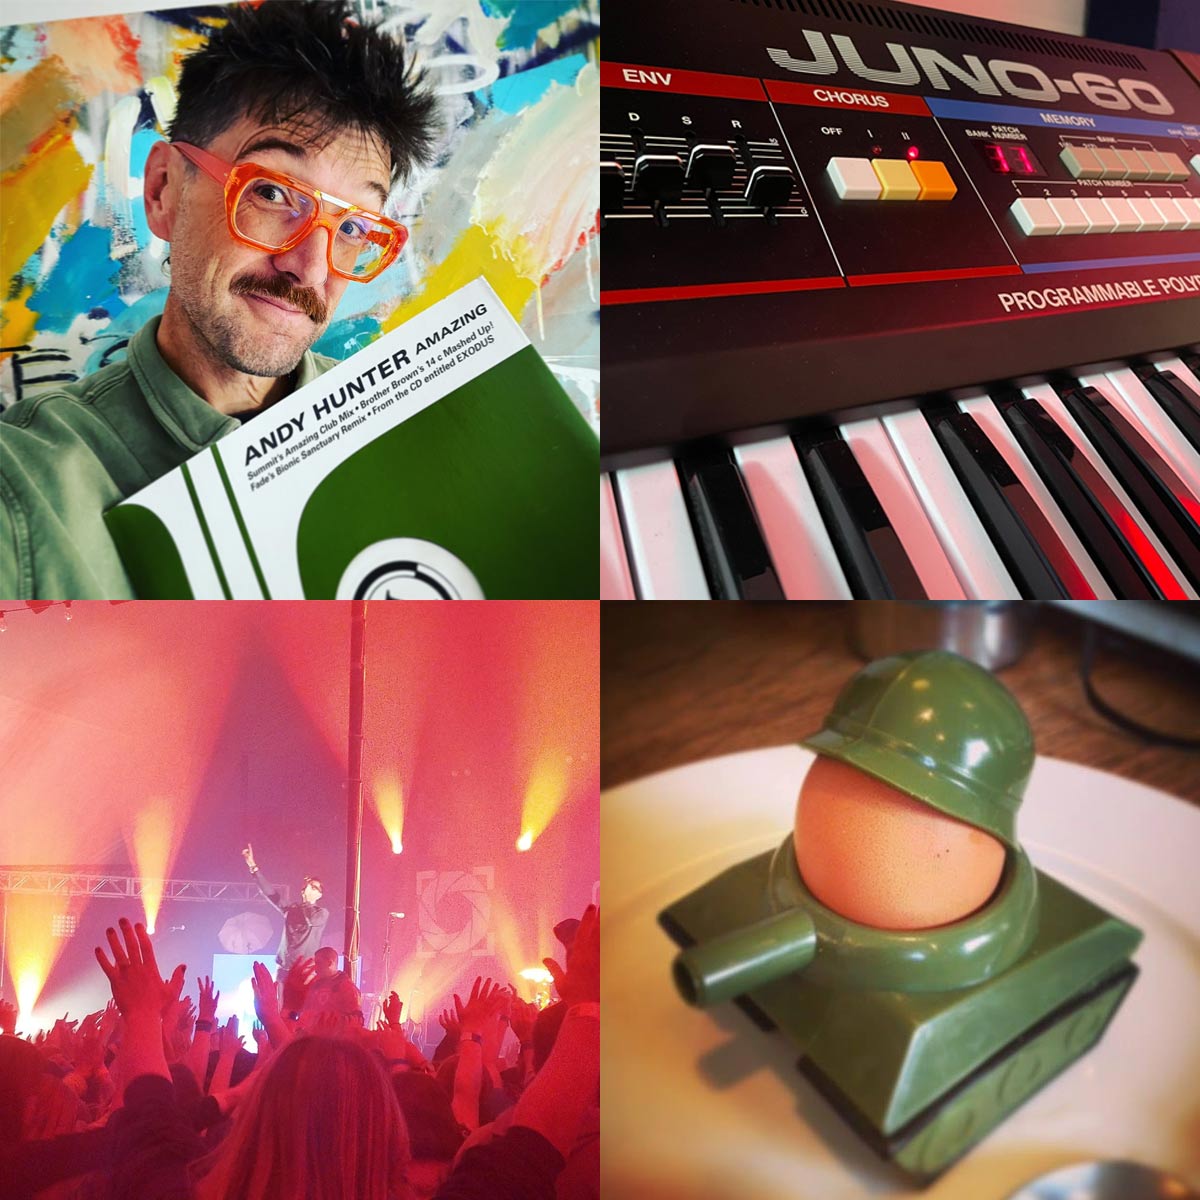 Clockwise: DJ Andy Hunter, Juno-60 synthesizer, boiled egg tank and performing live